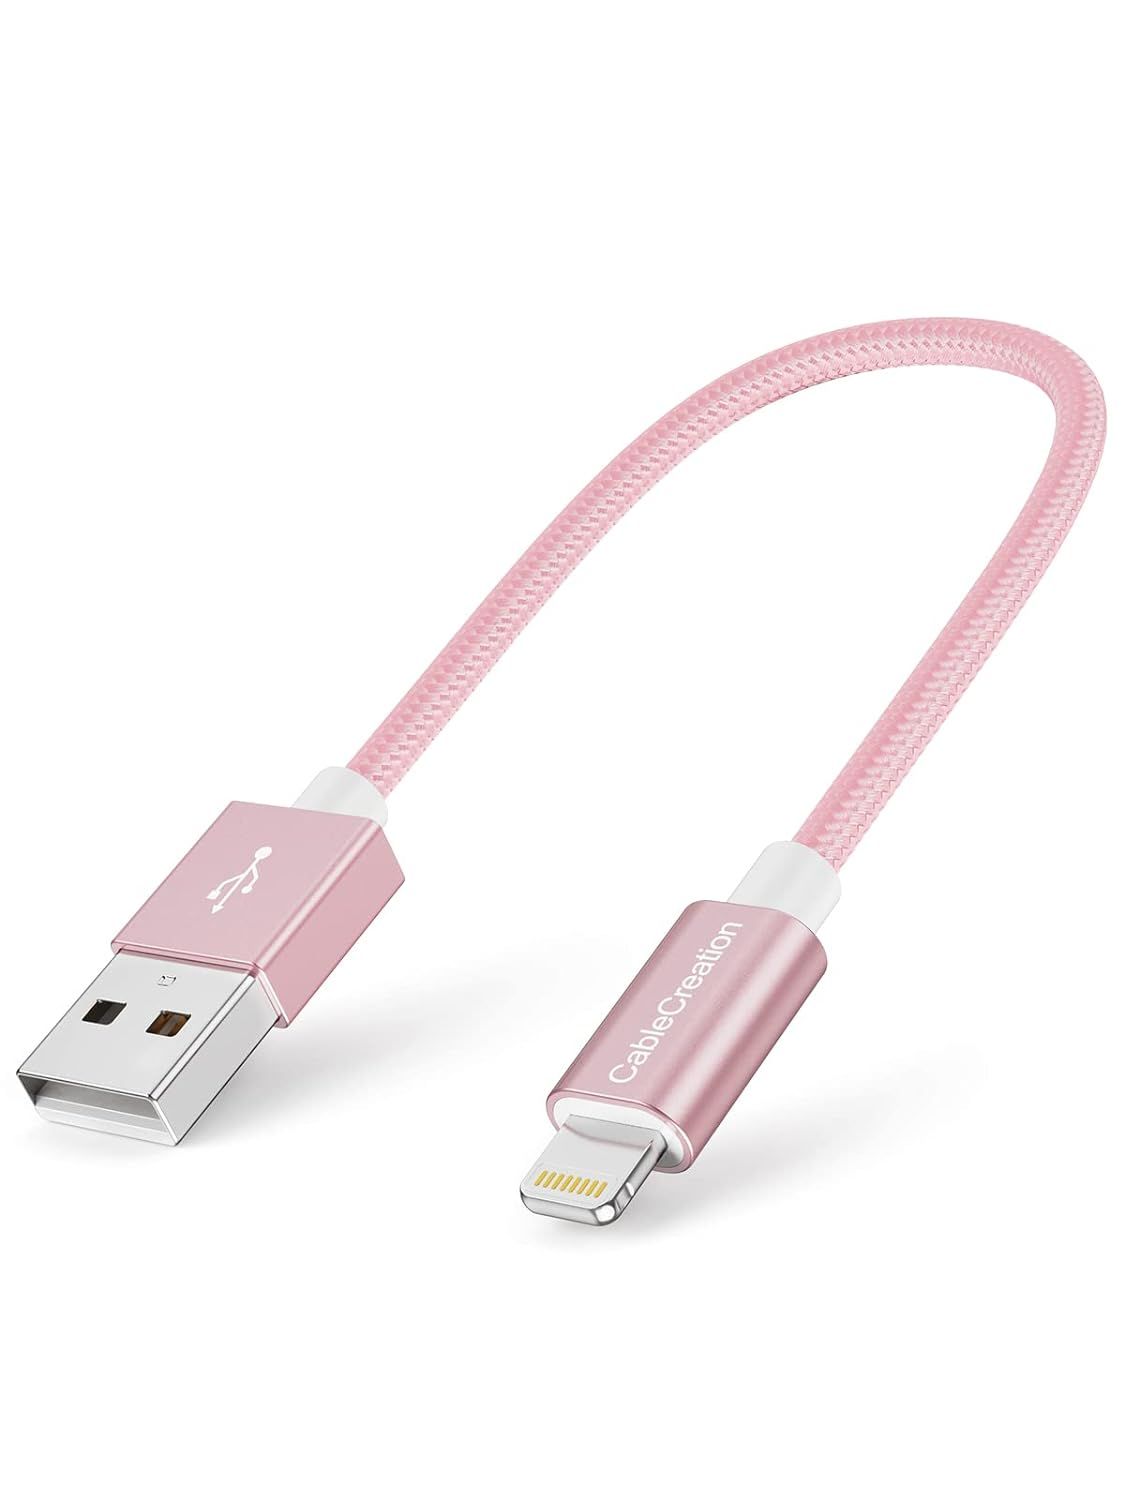 CableCreation 0.5 Feet Short iPhone Charging Cable, [MFi Certified] 6 Inch Lightning to USB Data ... | Amazon (US)